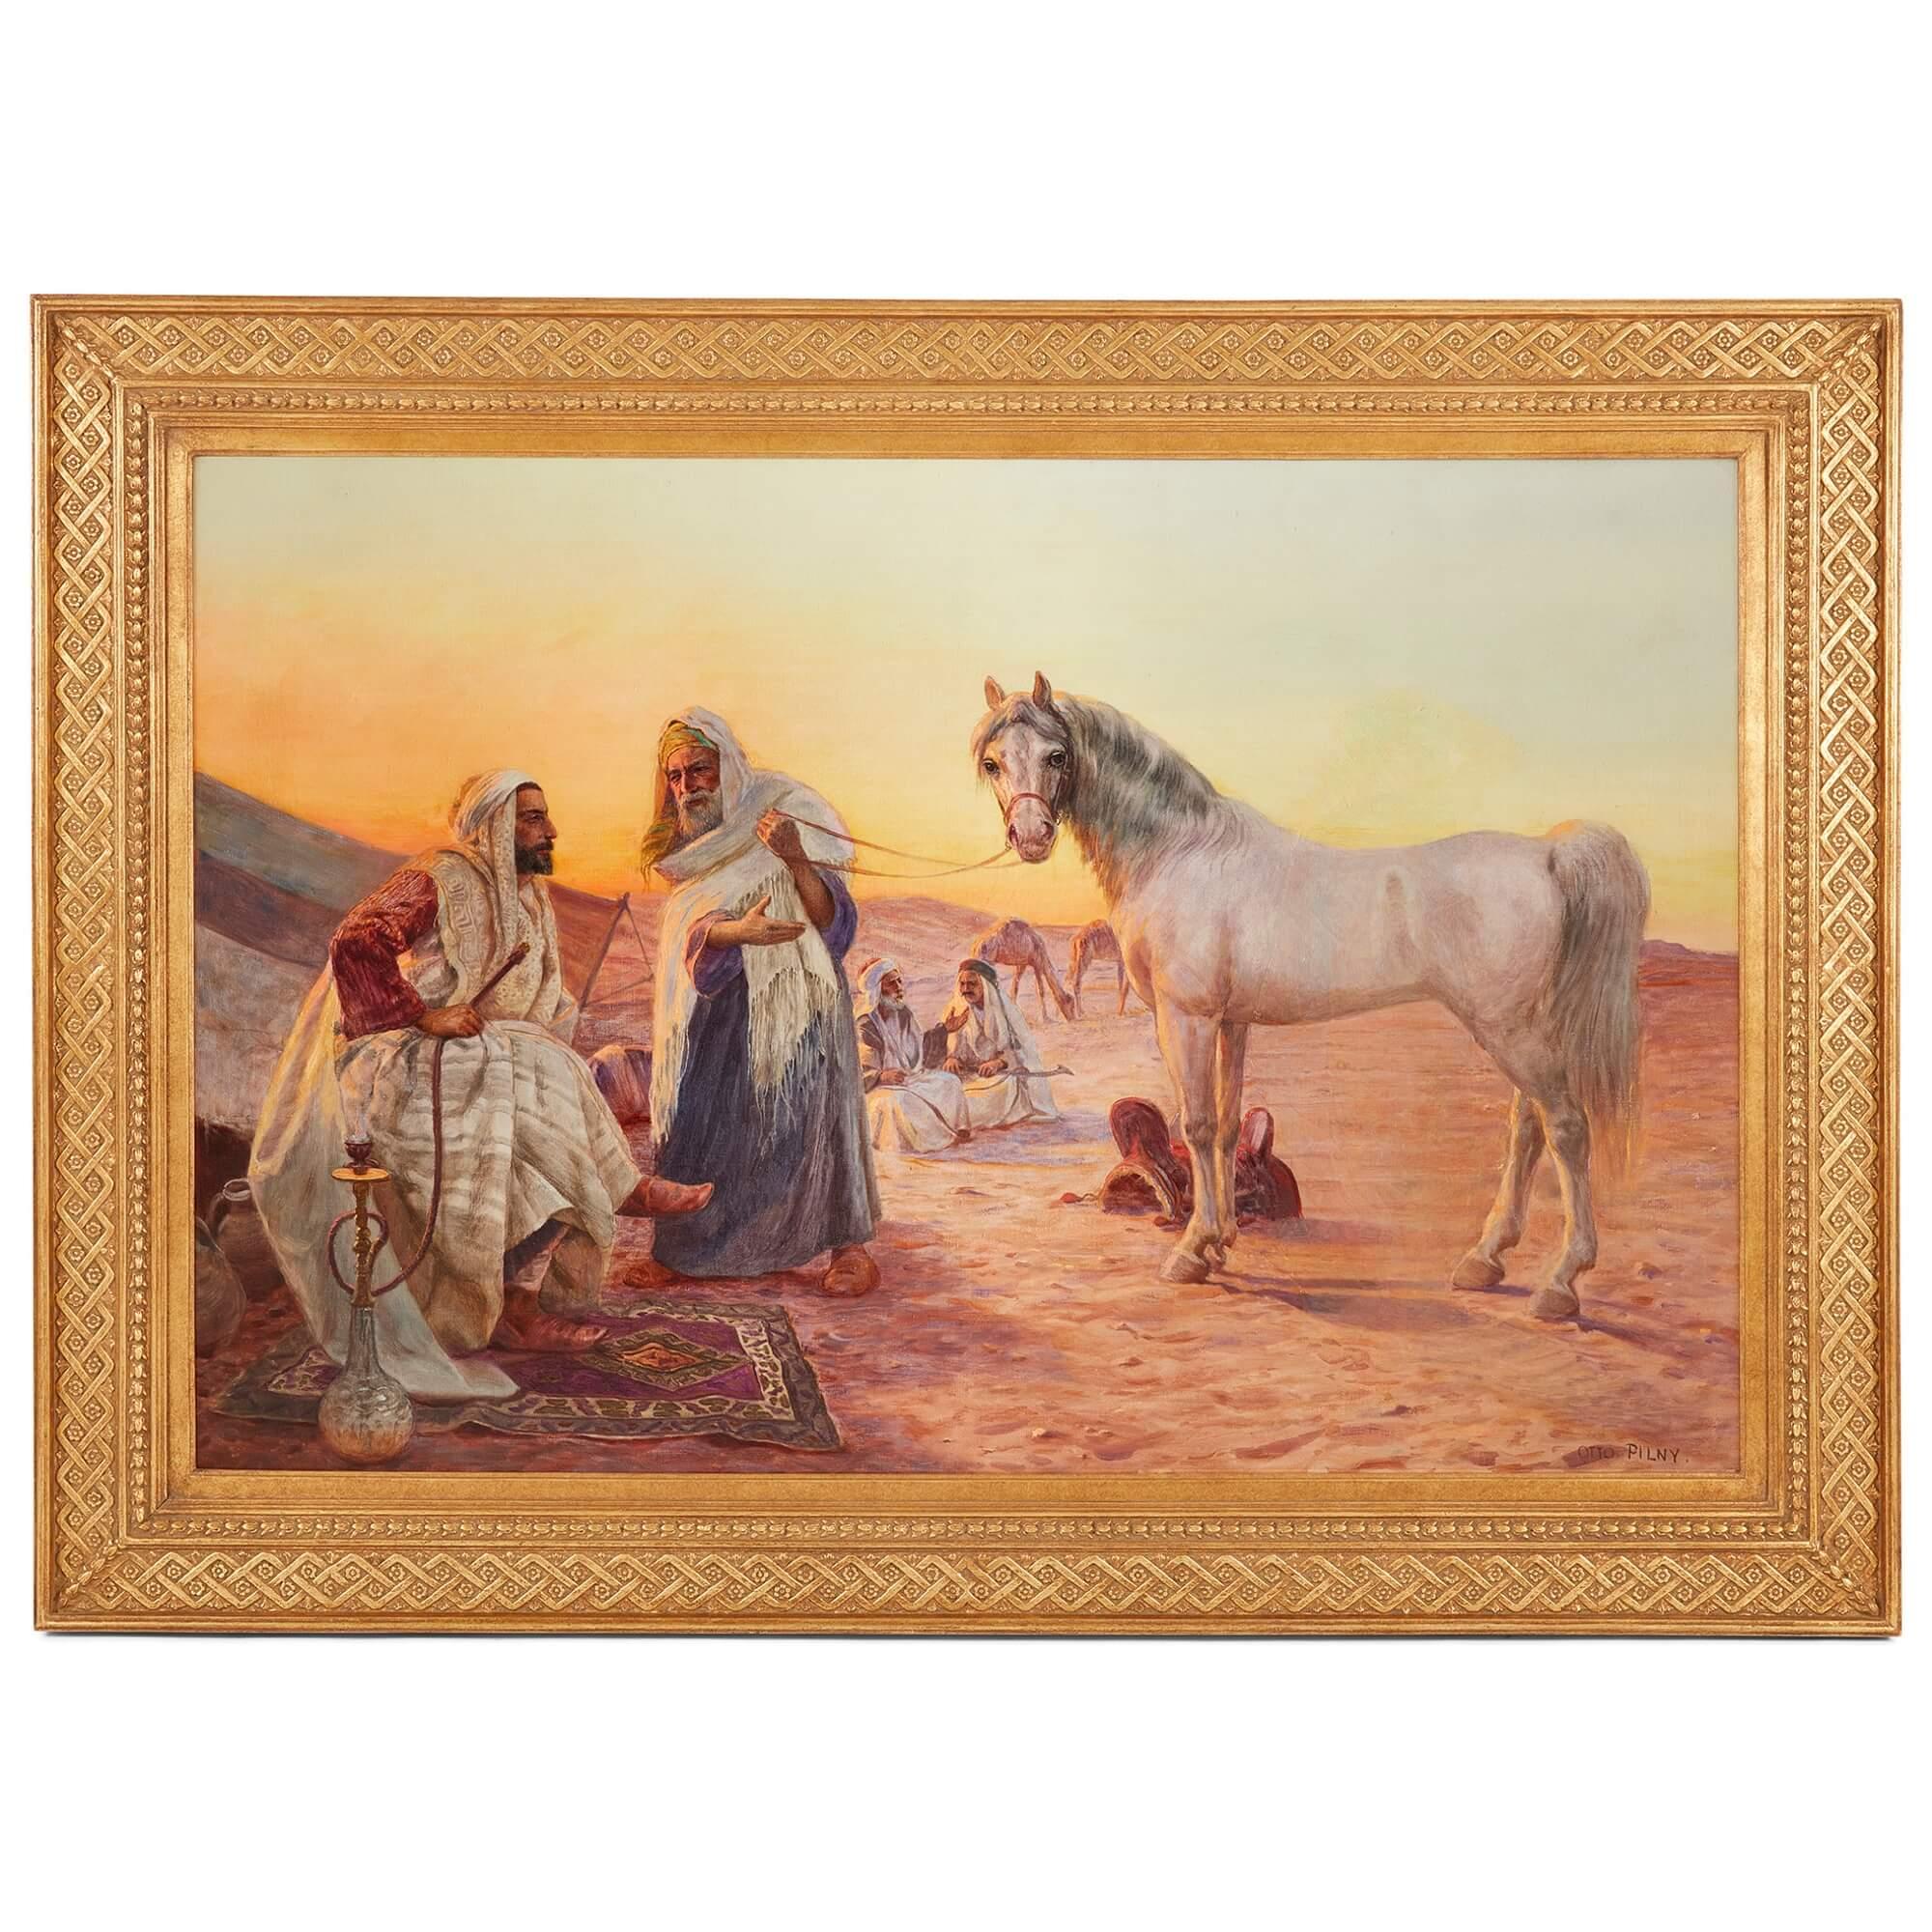 Otto Pilny Figurative Painting - Orientalist Oil Painting Depicting the Trade of a Horse by Pilny